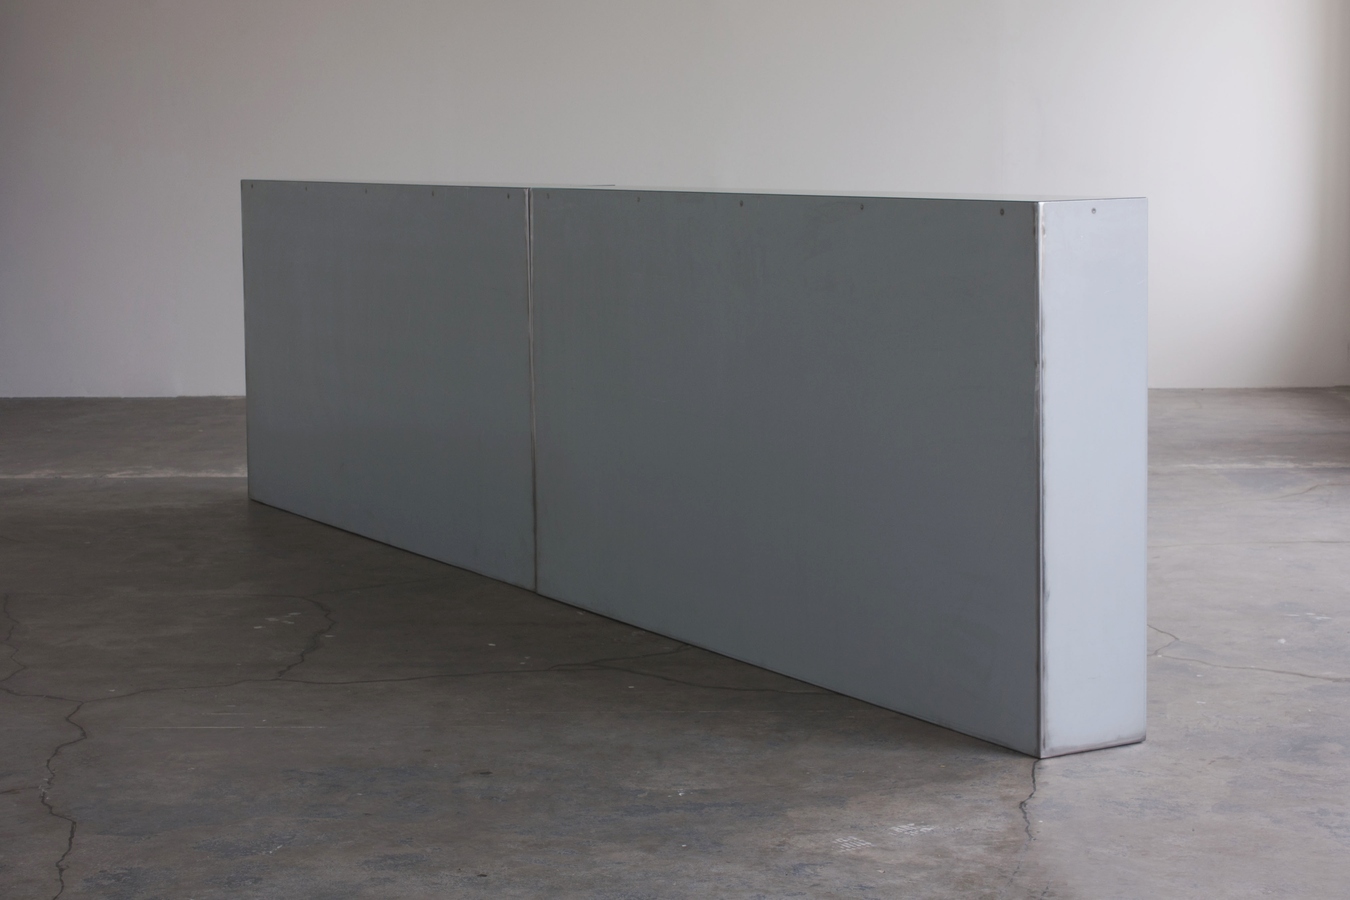 Sonya Lacey, Dilutions, installation view